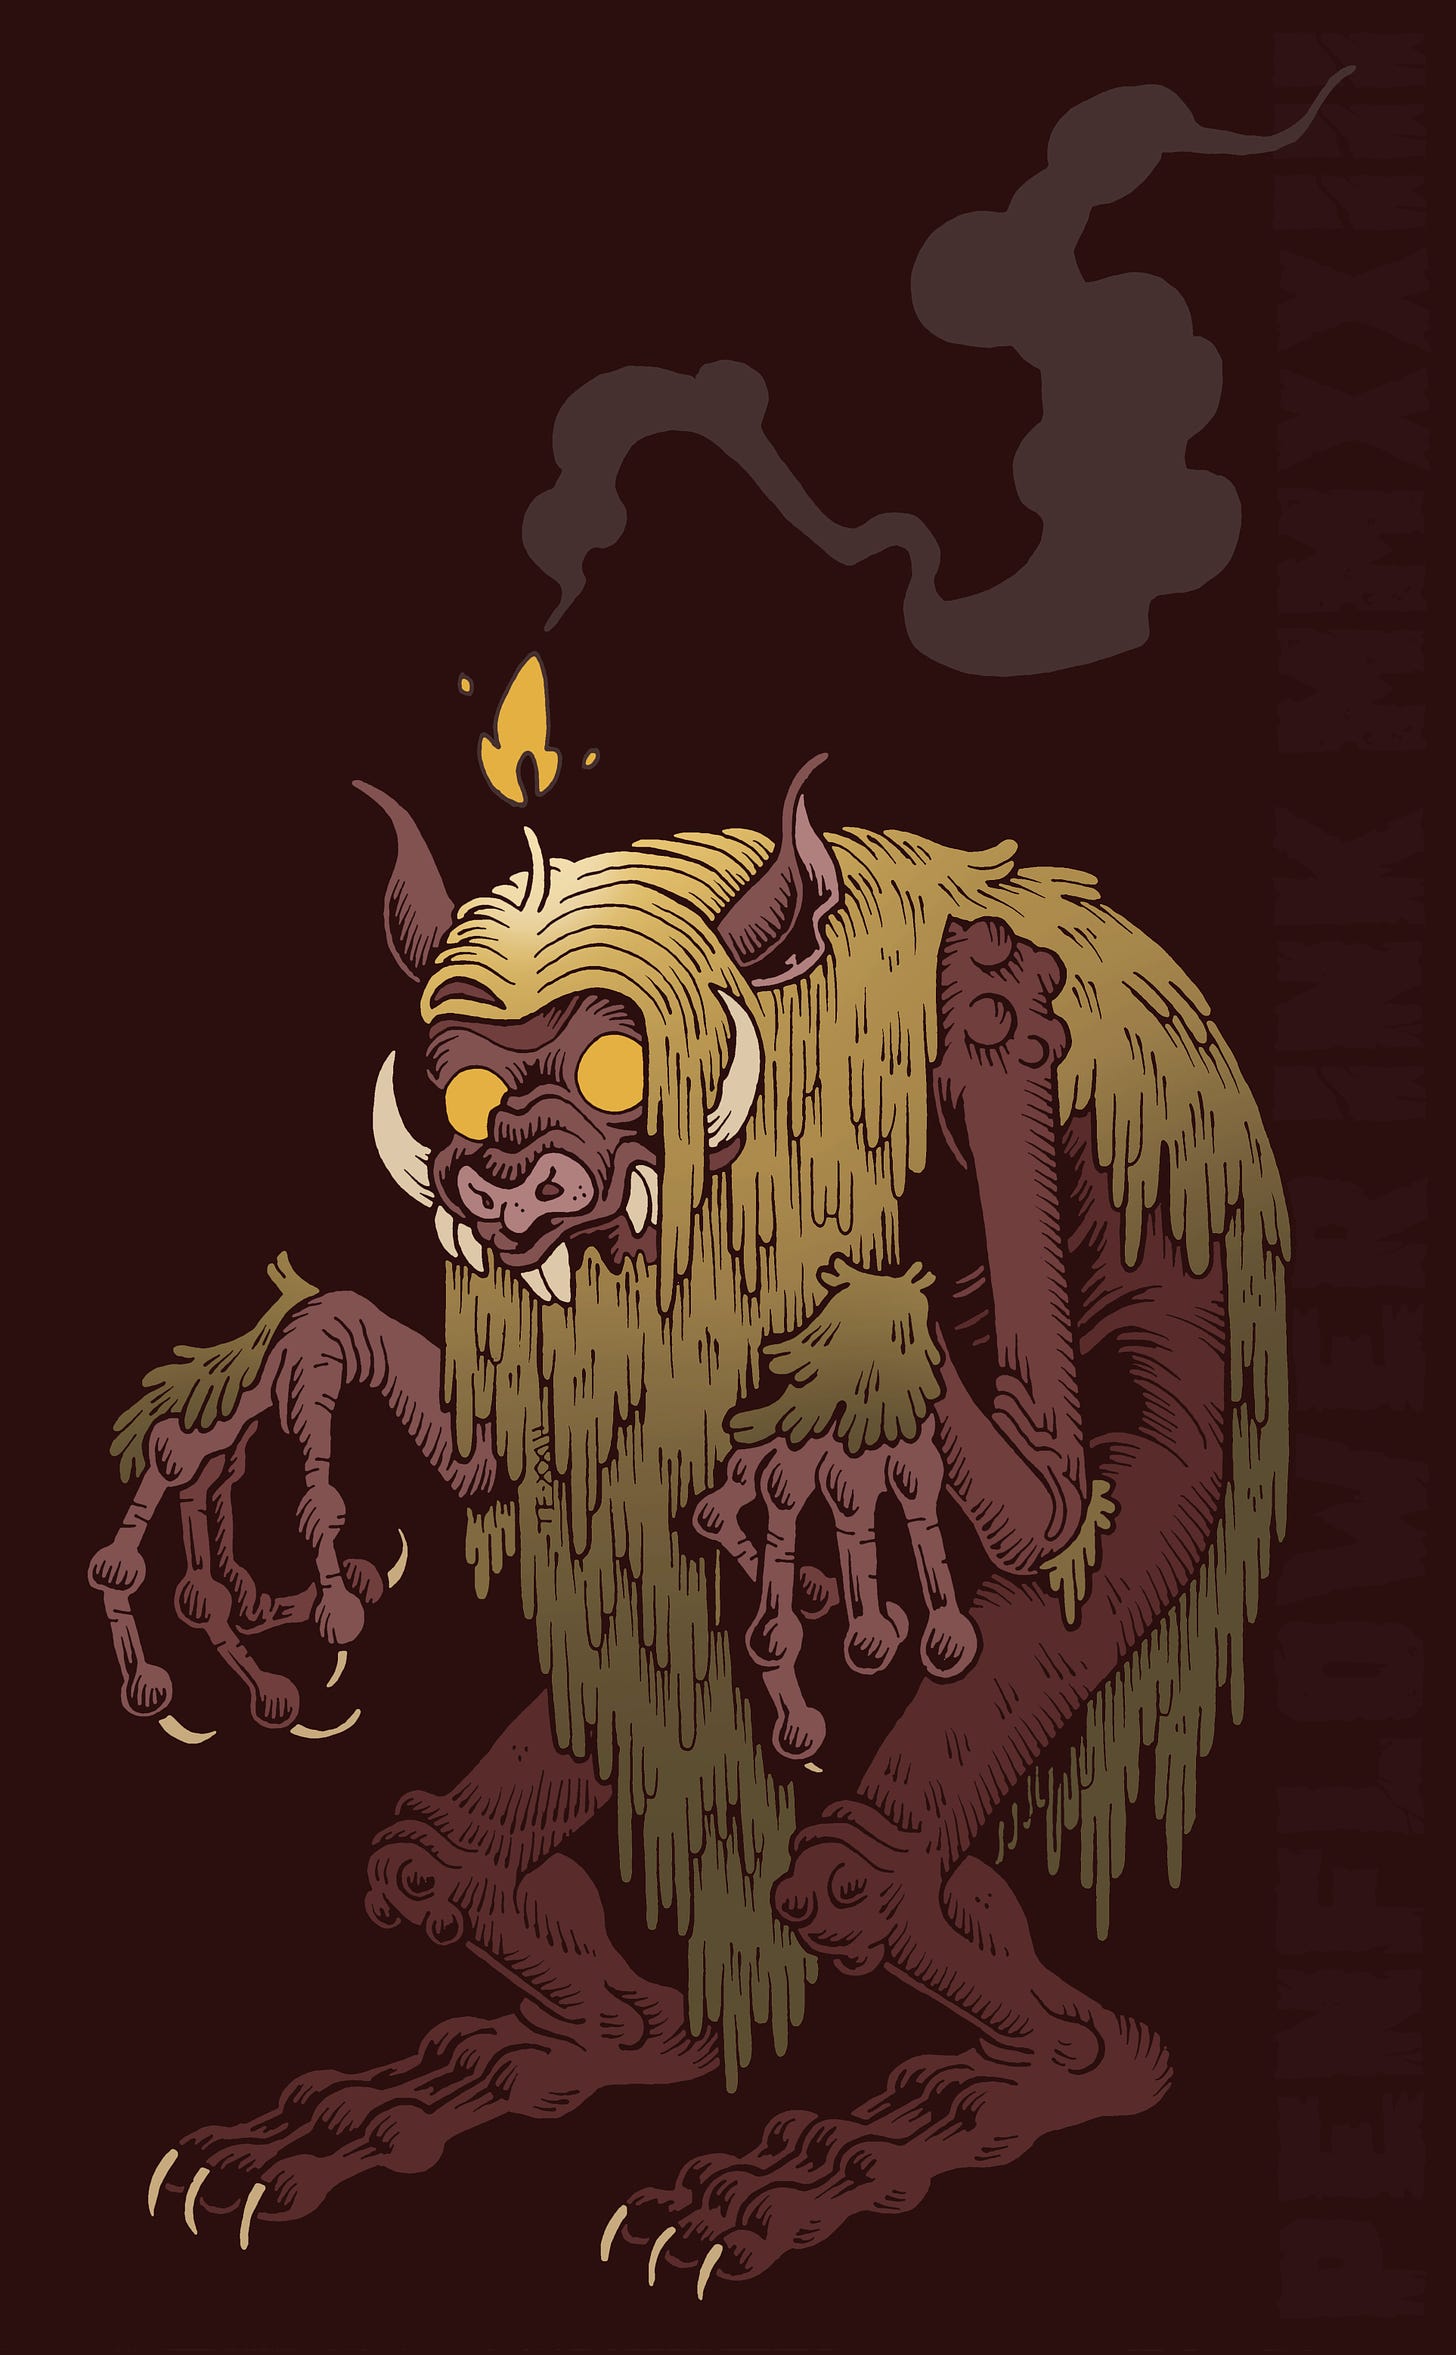 Traditionally hand-drawn and digitally coloured illustration of a large, shaggy humanoid creature with long, spindly clawed fingers and toes, porcine features and large round glowing eyes. A small flame flickers above their head, leaving behind a curling trail of smoke.